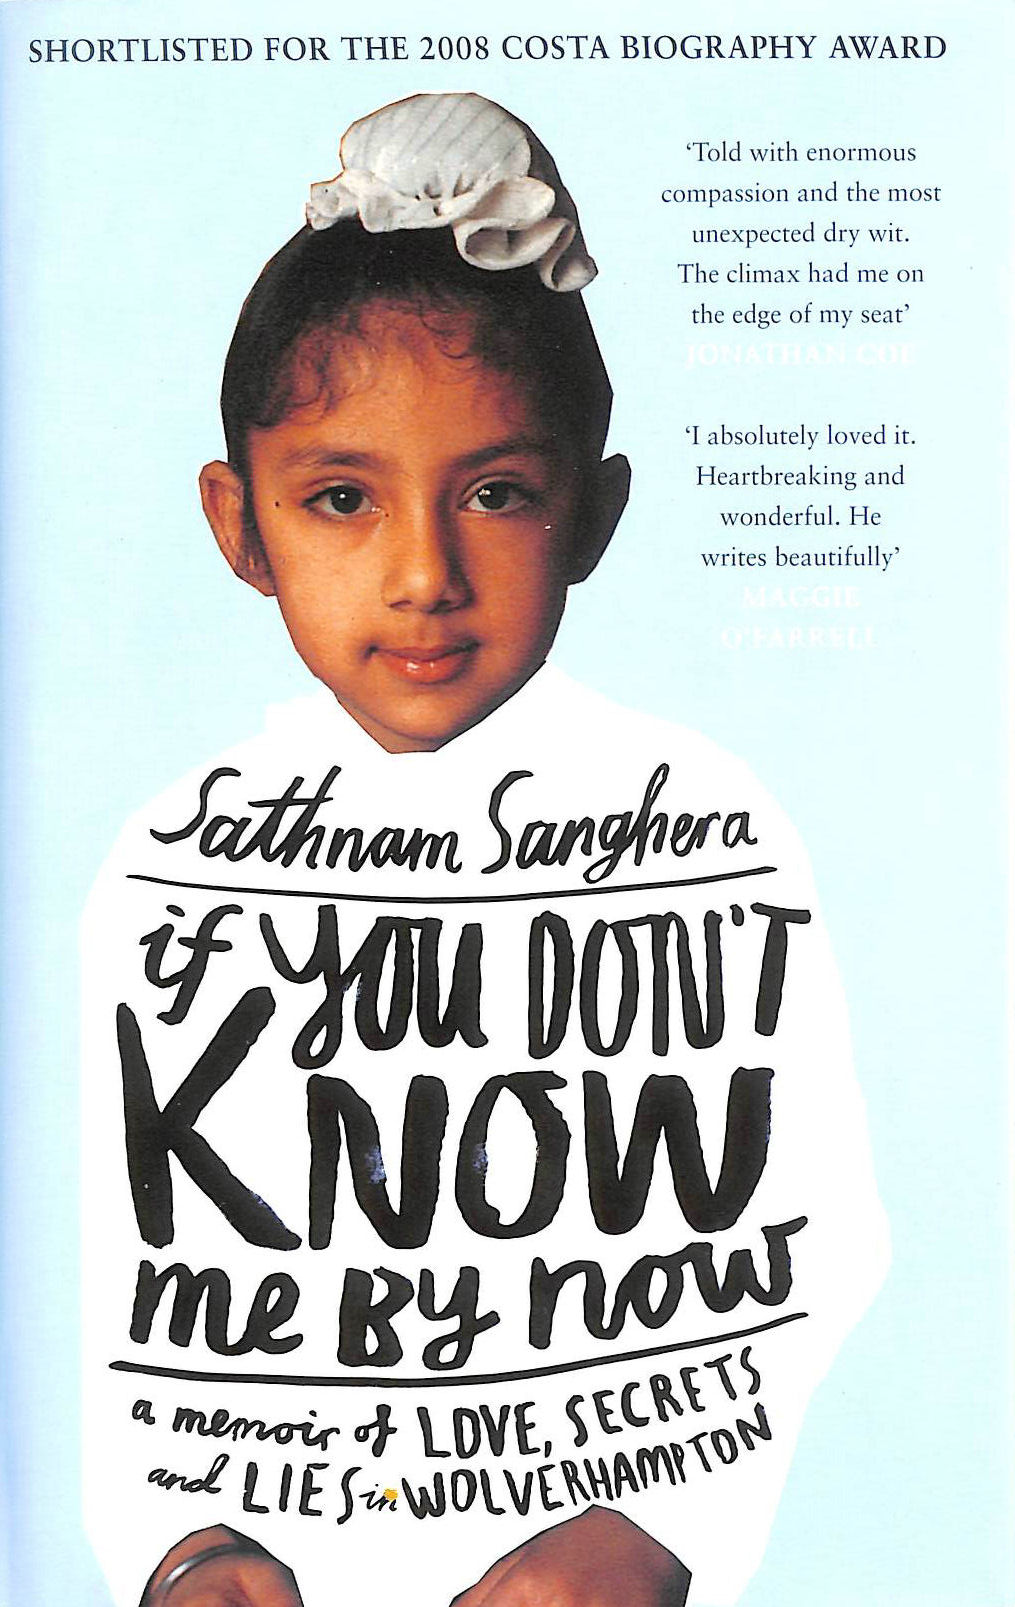 SANGHERA, SATHNAM - If You Don't Know Me by Now: A Memoir of Love, Secrets and Lies in Wolverhampton